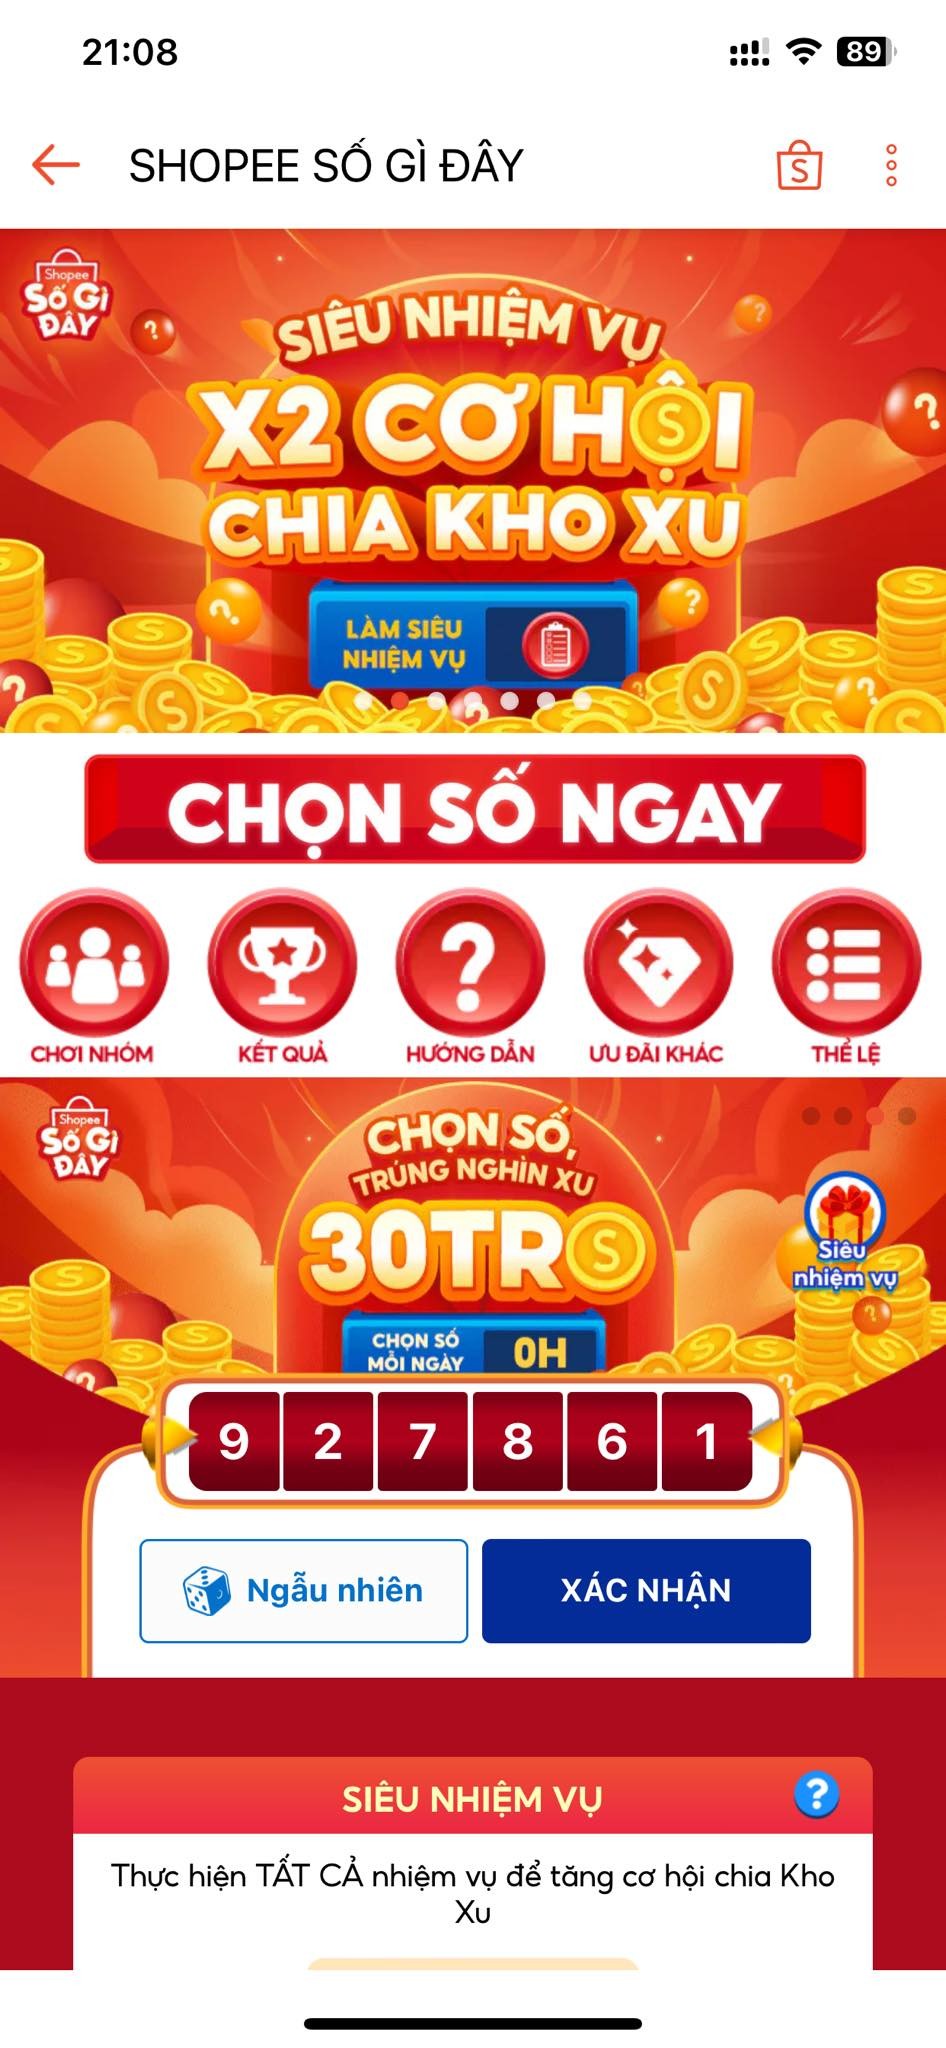 How to play Shopee games on computer and iPhone to receive hundreds of thousands of coins every day